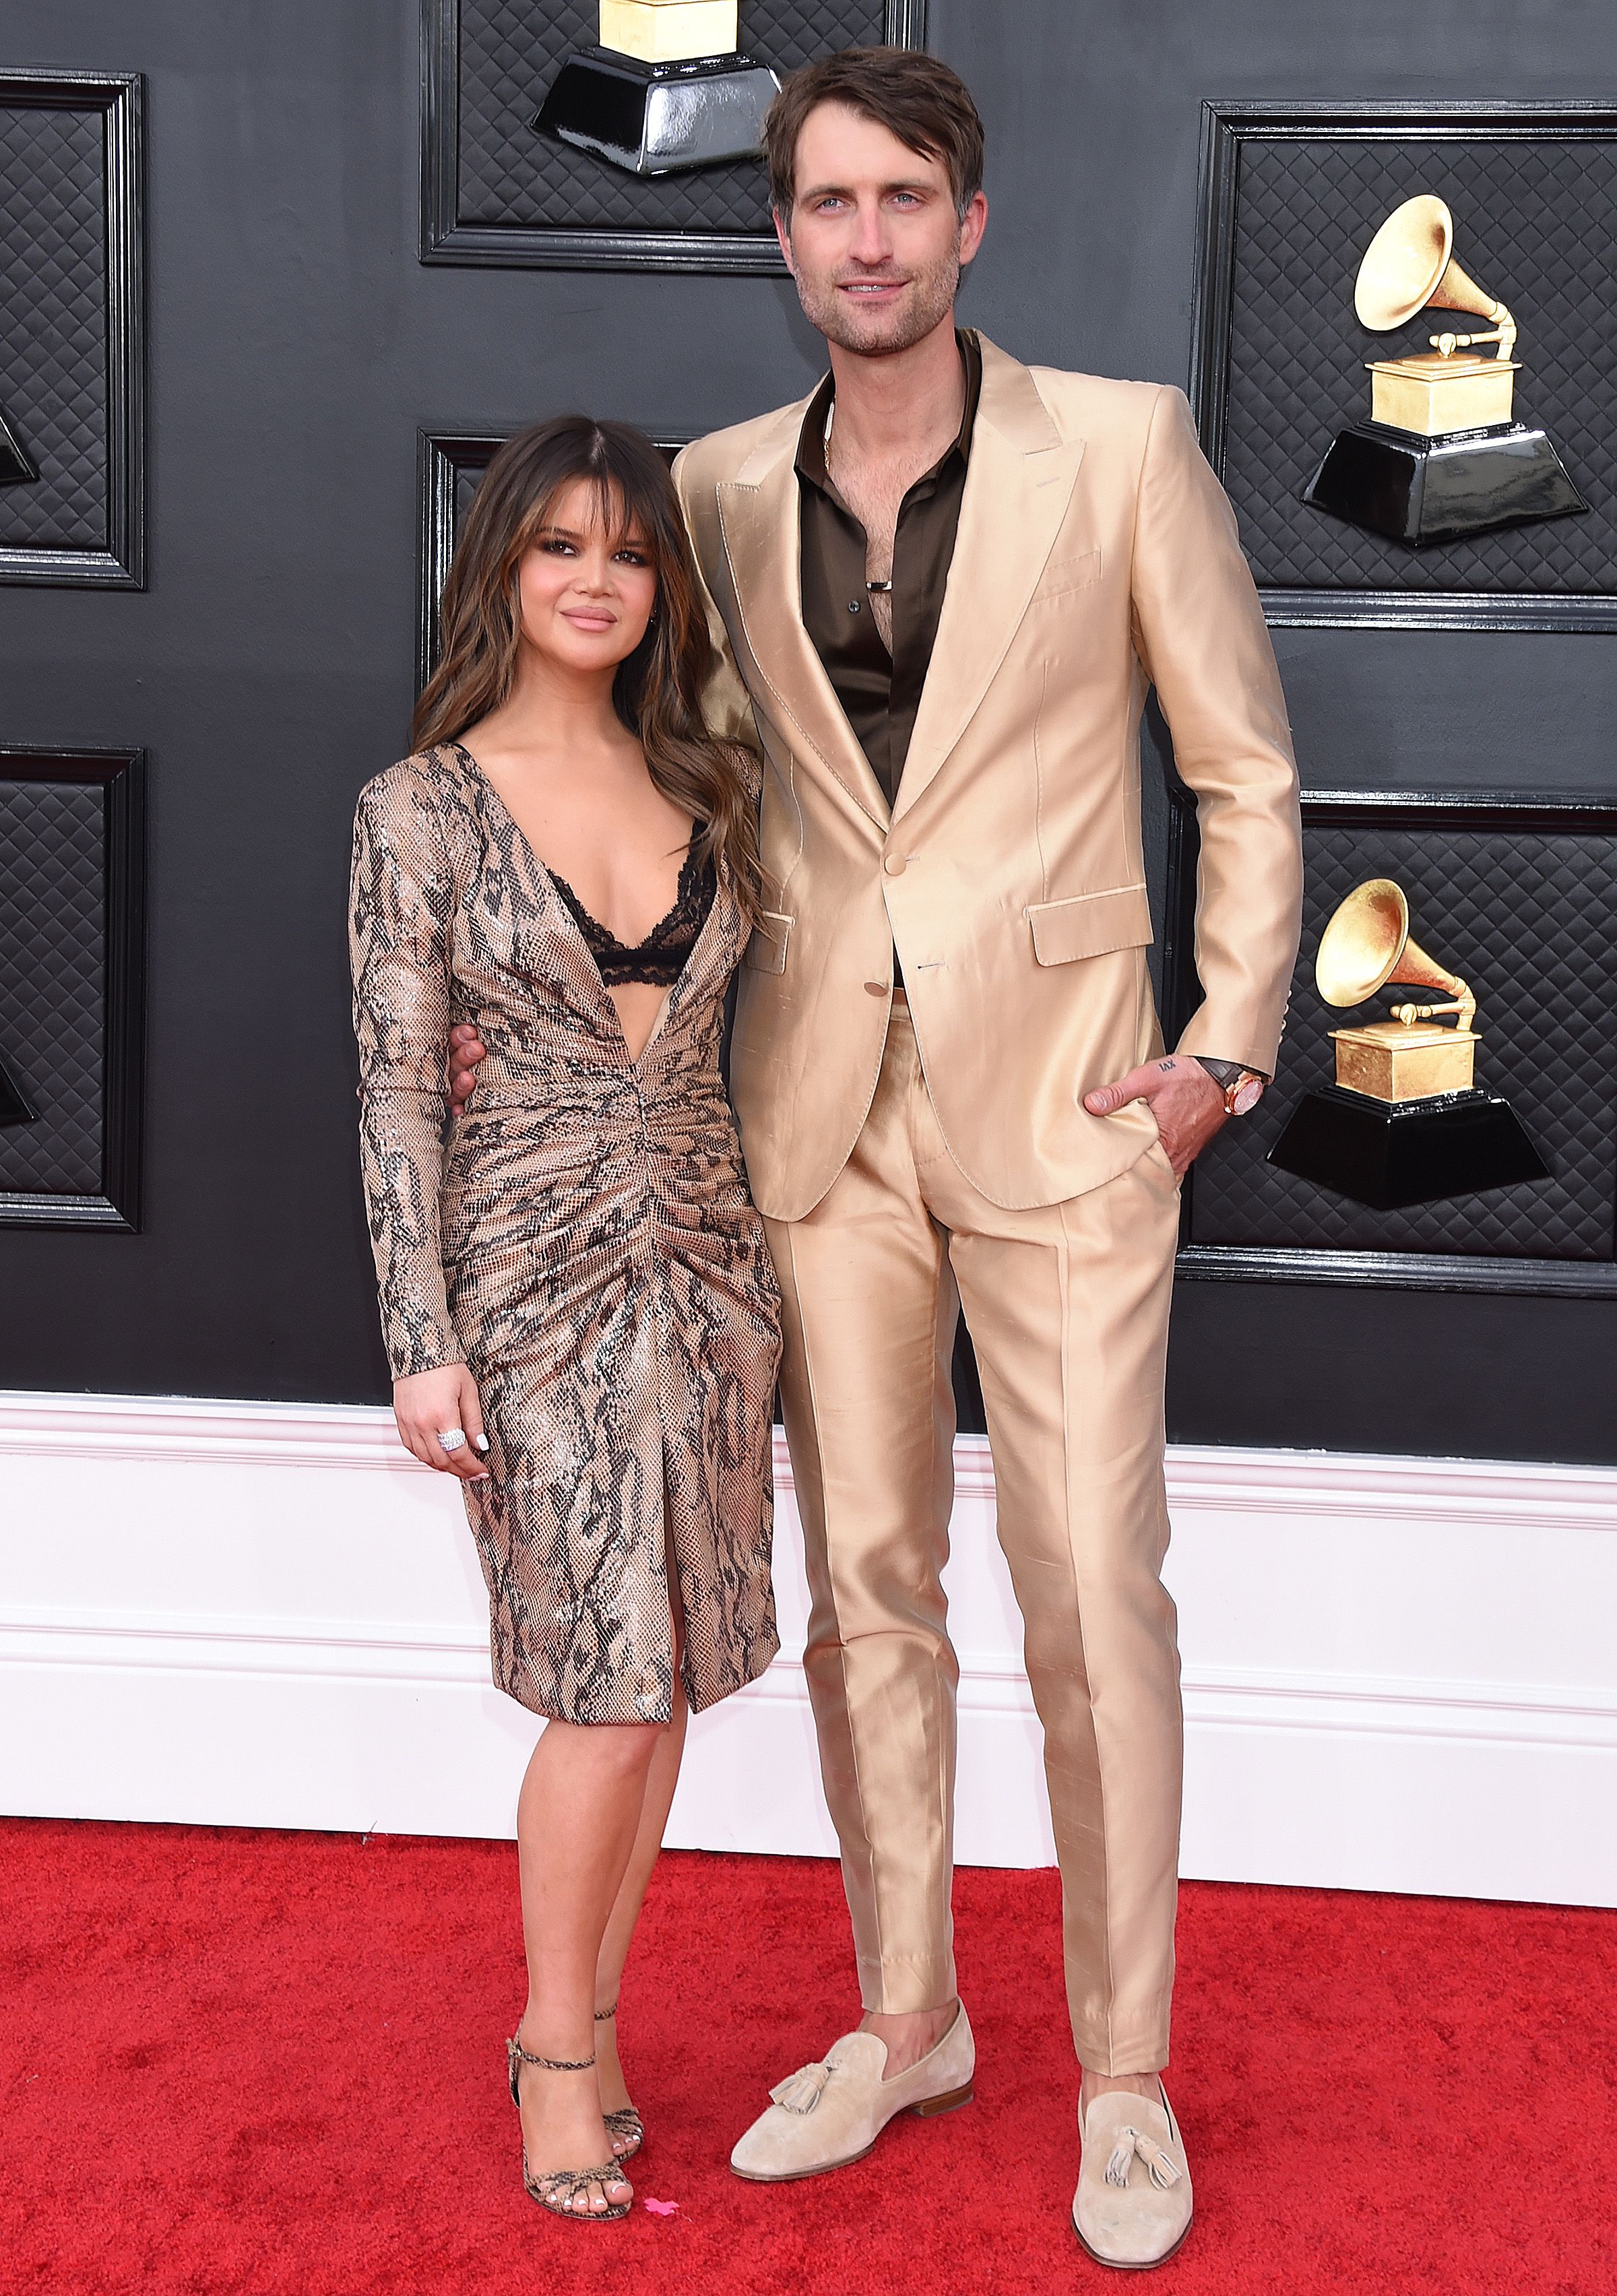 Country singer is more than a foot shorter than her husband, more